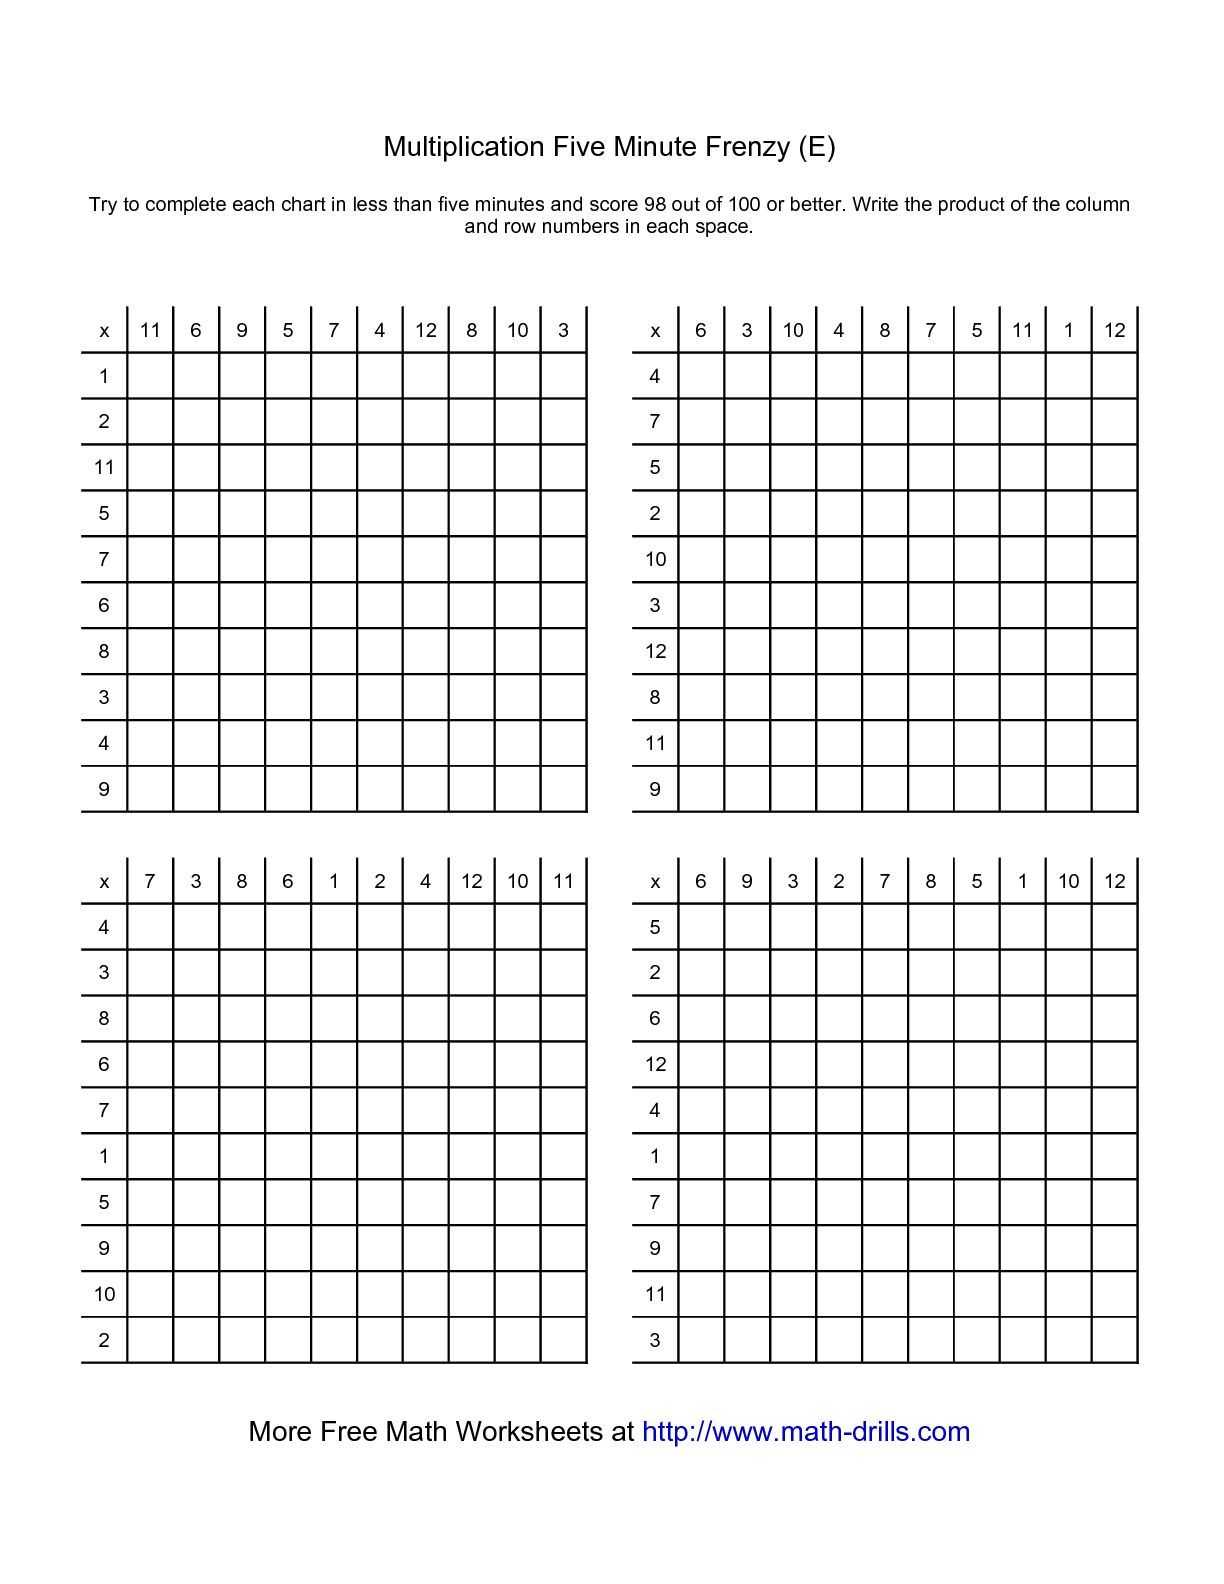 Standard Notation Worksheet or the Five Minute Frenzy Four Per Page E Math Worksheet From the